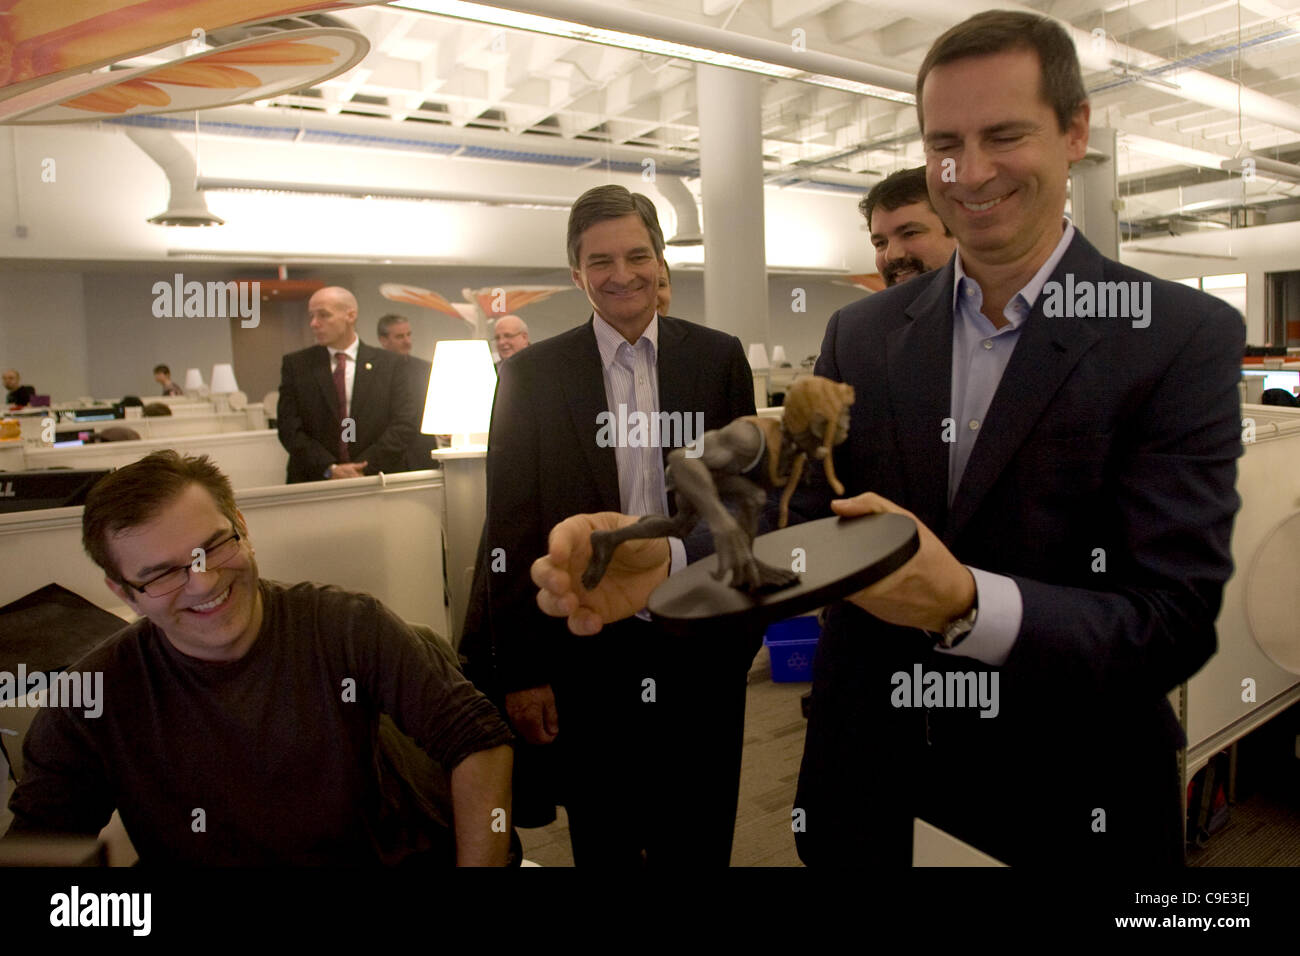 London Ontario, Canada - November 28, 2011. Dalton McGuinty, Premier of Ontario, right looks over a 'Darkling' statue and shares a joke with Jeff Ross, left, Chris Bentley MPP - London West and James Schmalz, president and founder of Digital Extremes. McGuinty was in London to make a funding announc Stock Photo